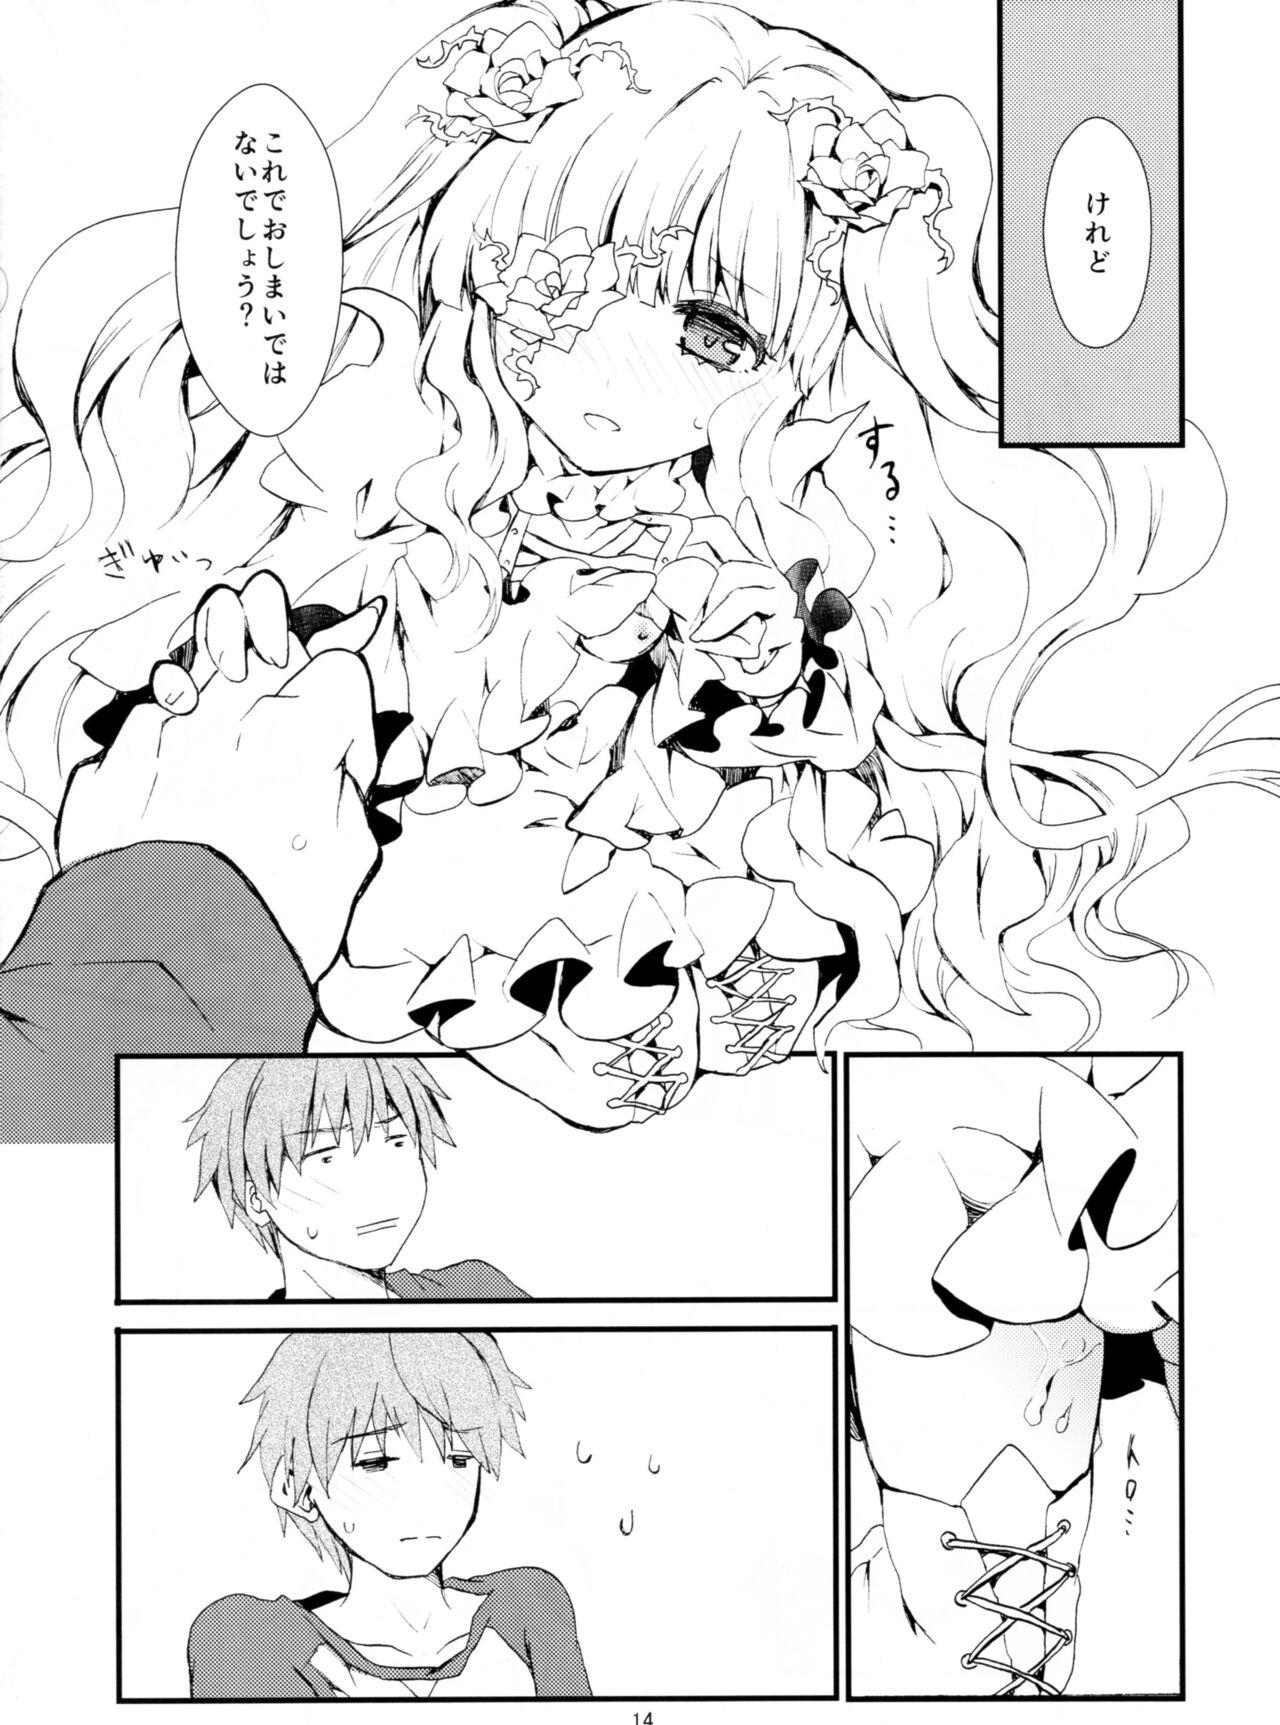 Club Eat me, Drink me - Rozen maiden Glamour Porn - Page 11